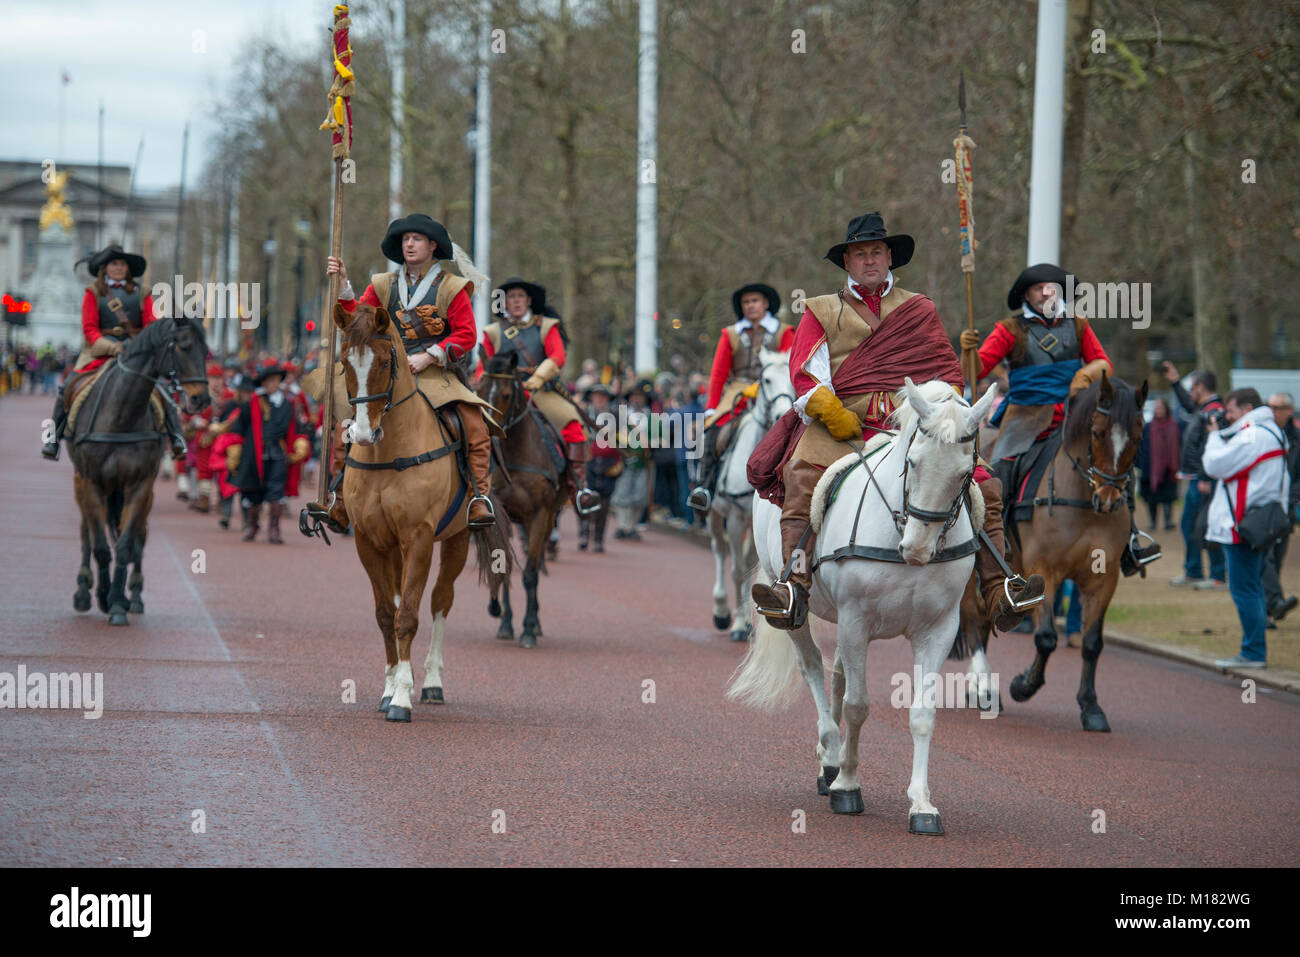 The Mall, London, UK. 28 January 2018. The King’s Army Annual March takes place, performed by members of The English Civil War Society, and follows the route taken by King Charles I from St James Palace, along the Mall to the place of his beheading at Banqueting House in Whitehall on 30 January 1649. A wreath is laid at his execution site. Credit: Malcolm Park/Alamy Live News. Stock Photo